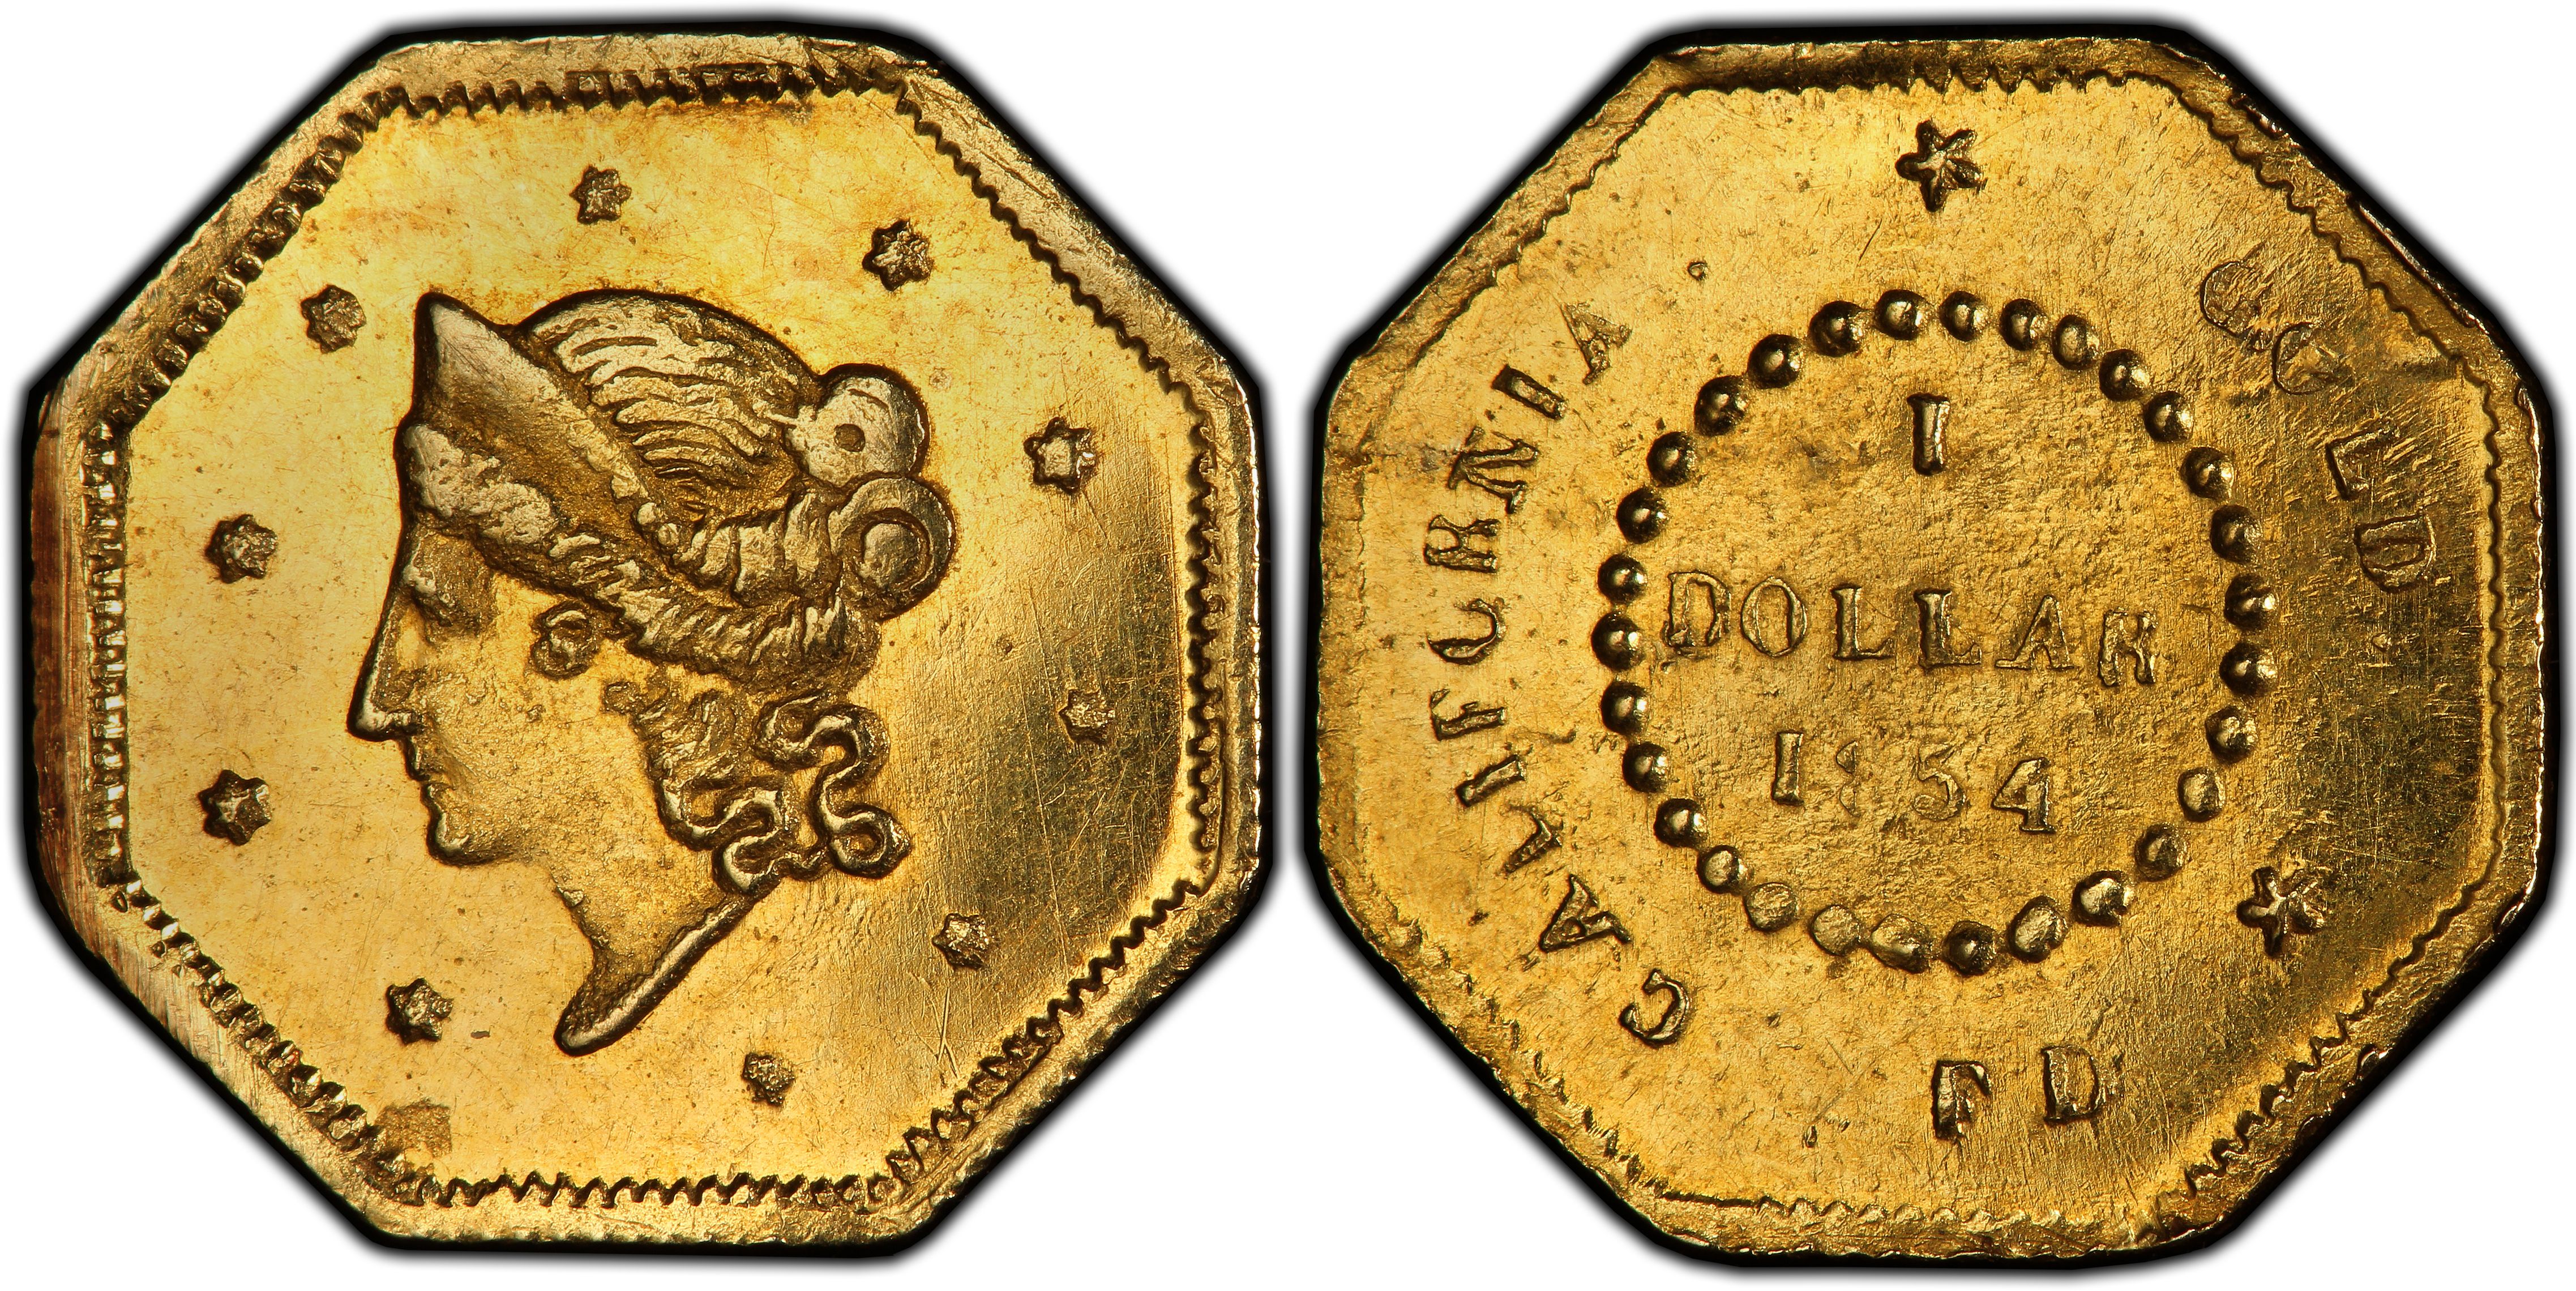 Images of California Fractional Gold 1854 $1 BG-509 - PCGS CoinFacts